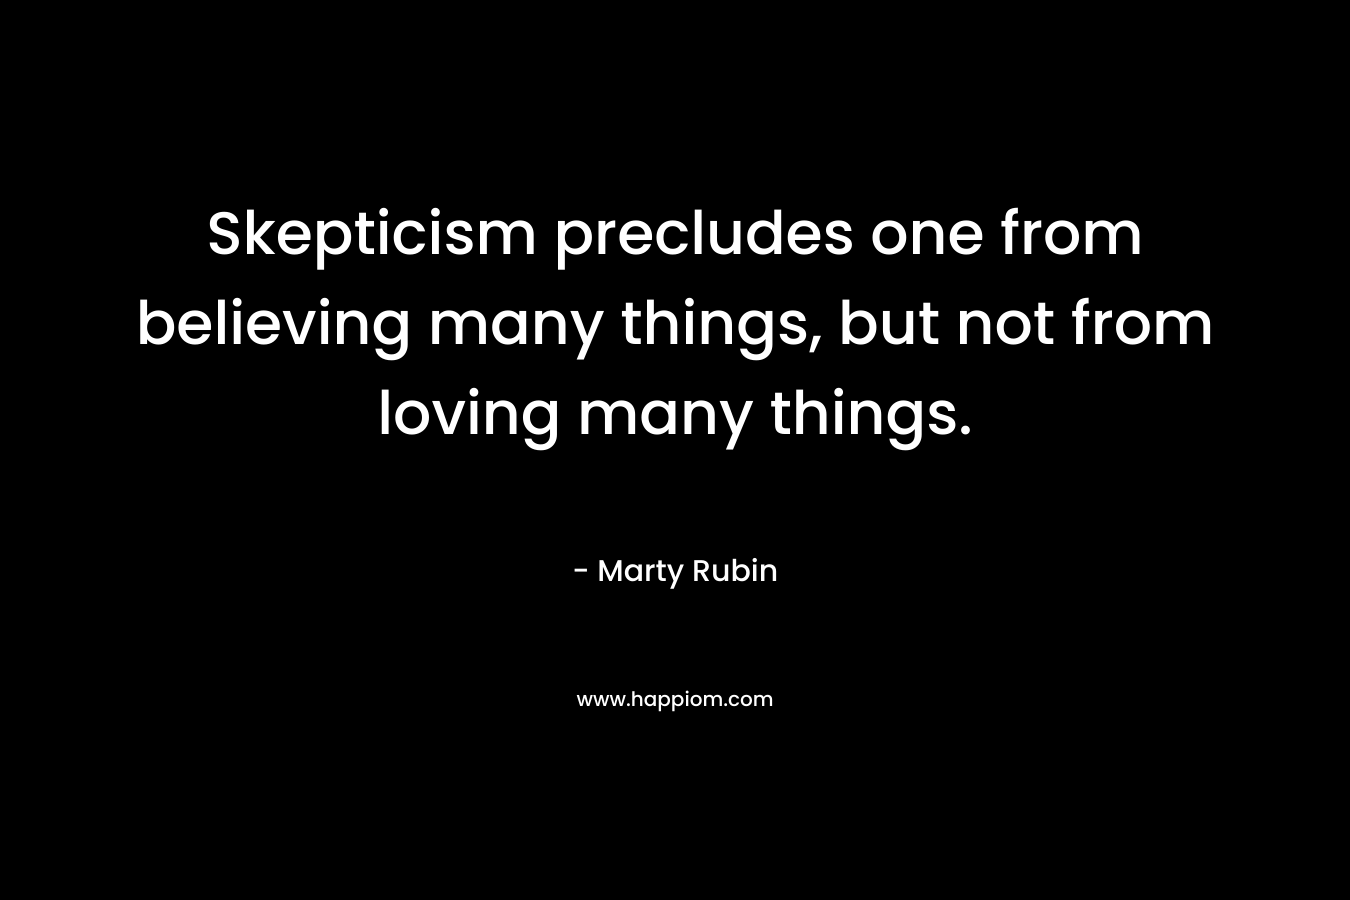 Skepticism precludes one from believing many things, but not from loving many things.